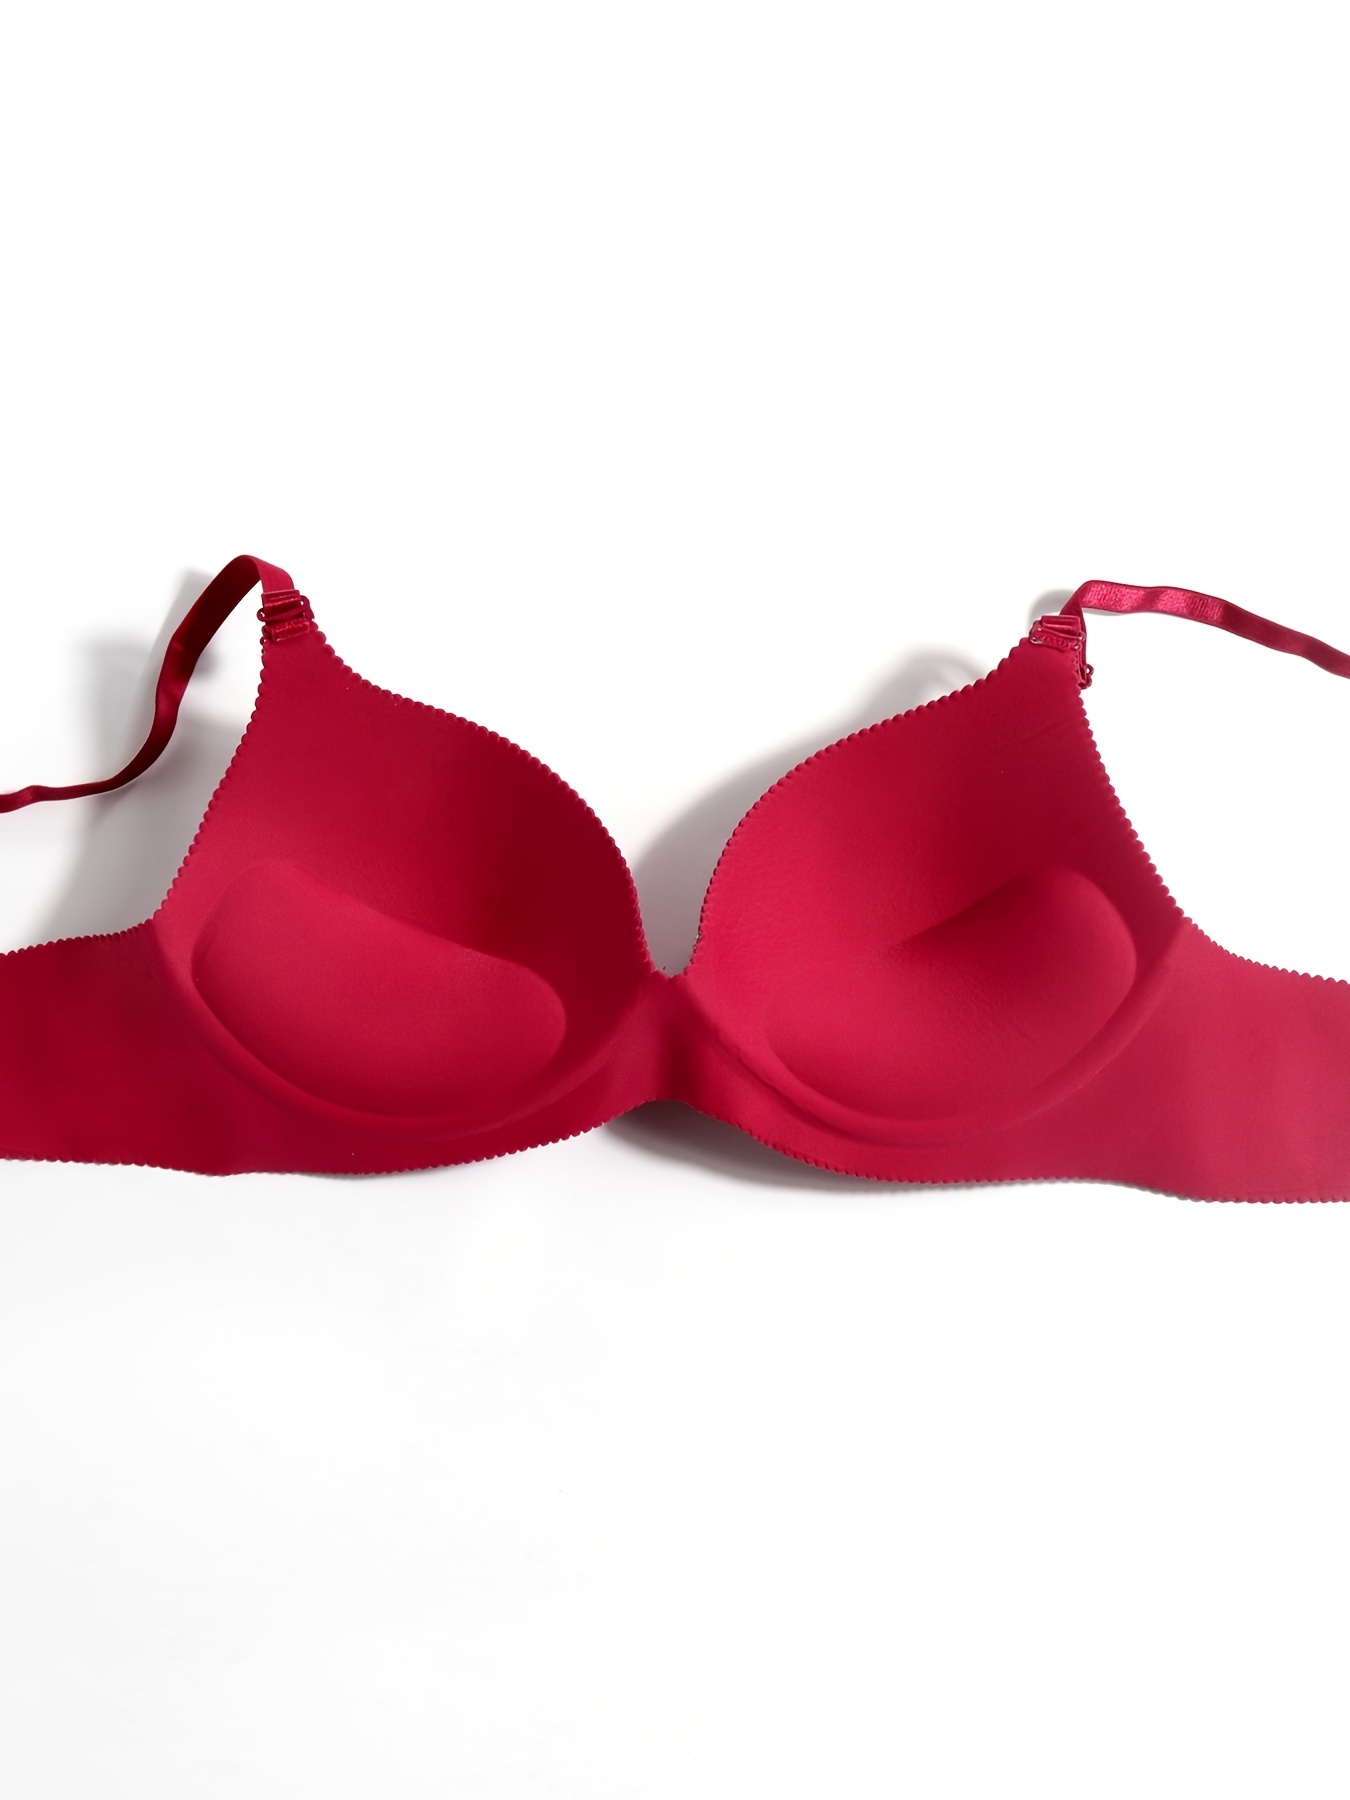 Sexy Wireless Bras For Women Push Up Lingerie Seamless Red Bra